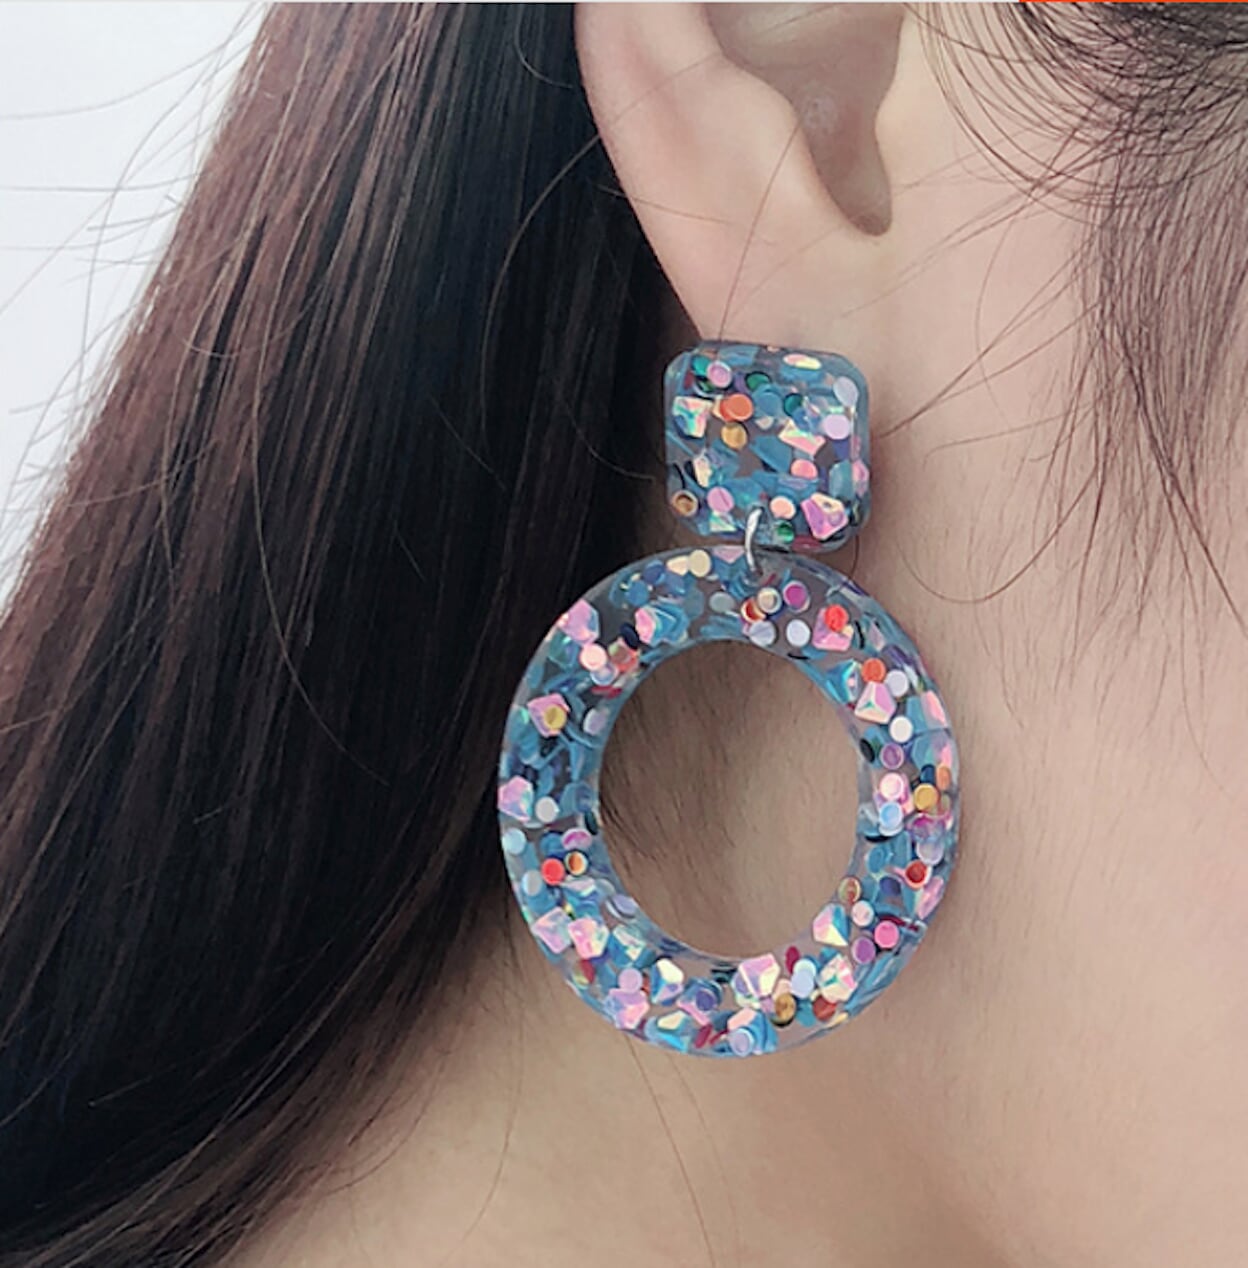 Colorful Hollow Round Acrylic Earrings